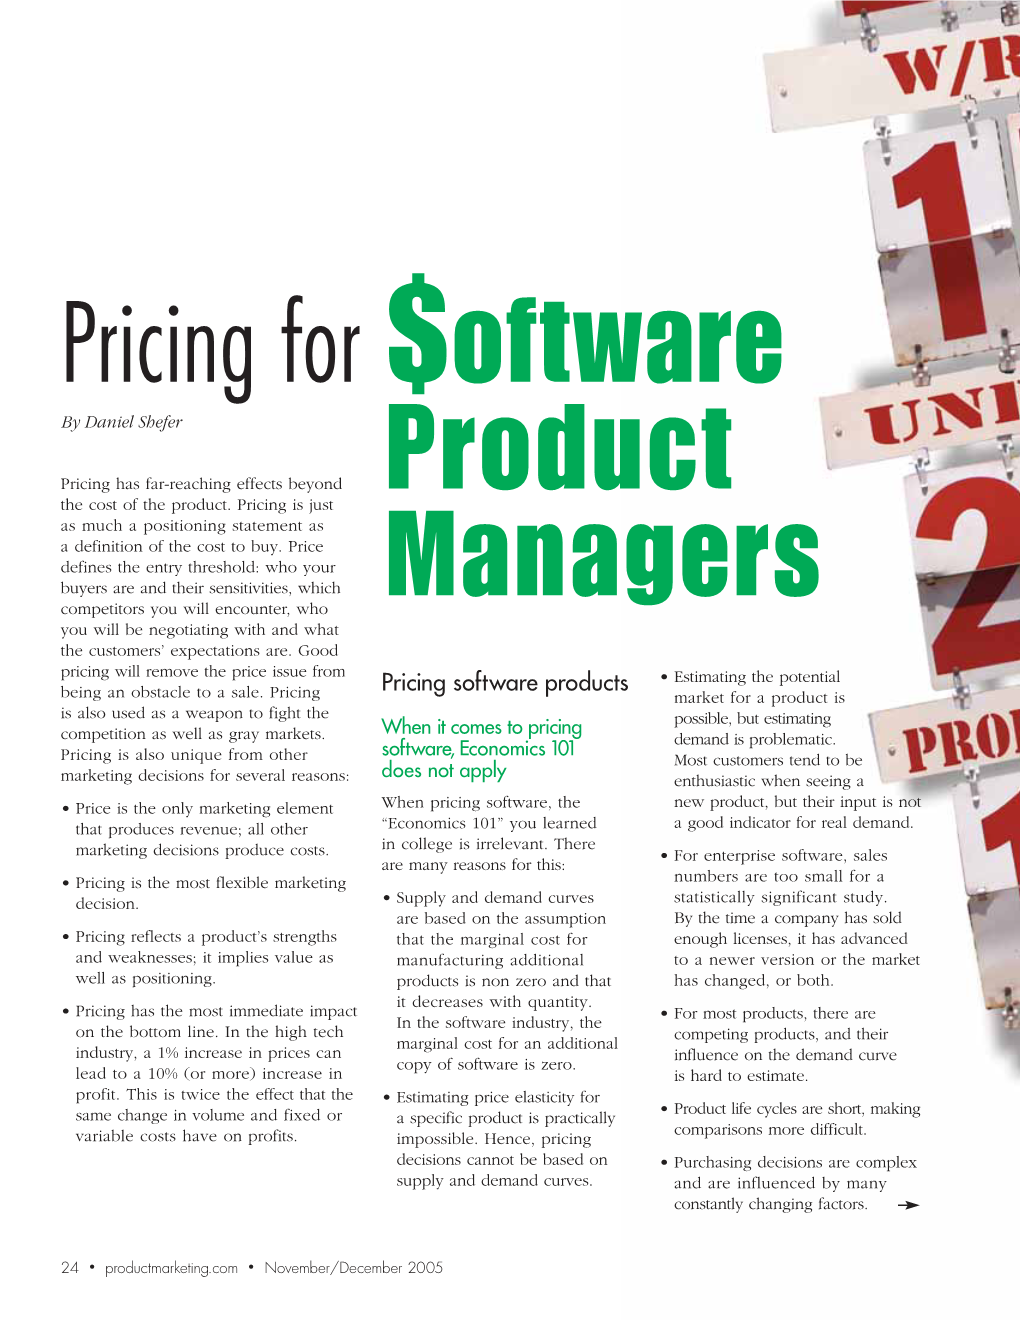 Pricing for $Oftware by Daniel Shefer